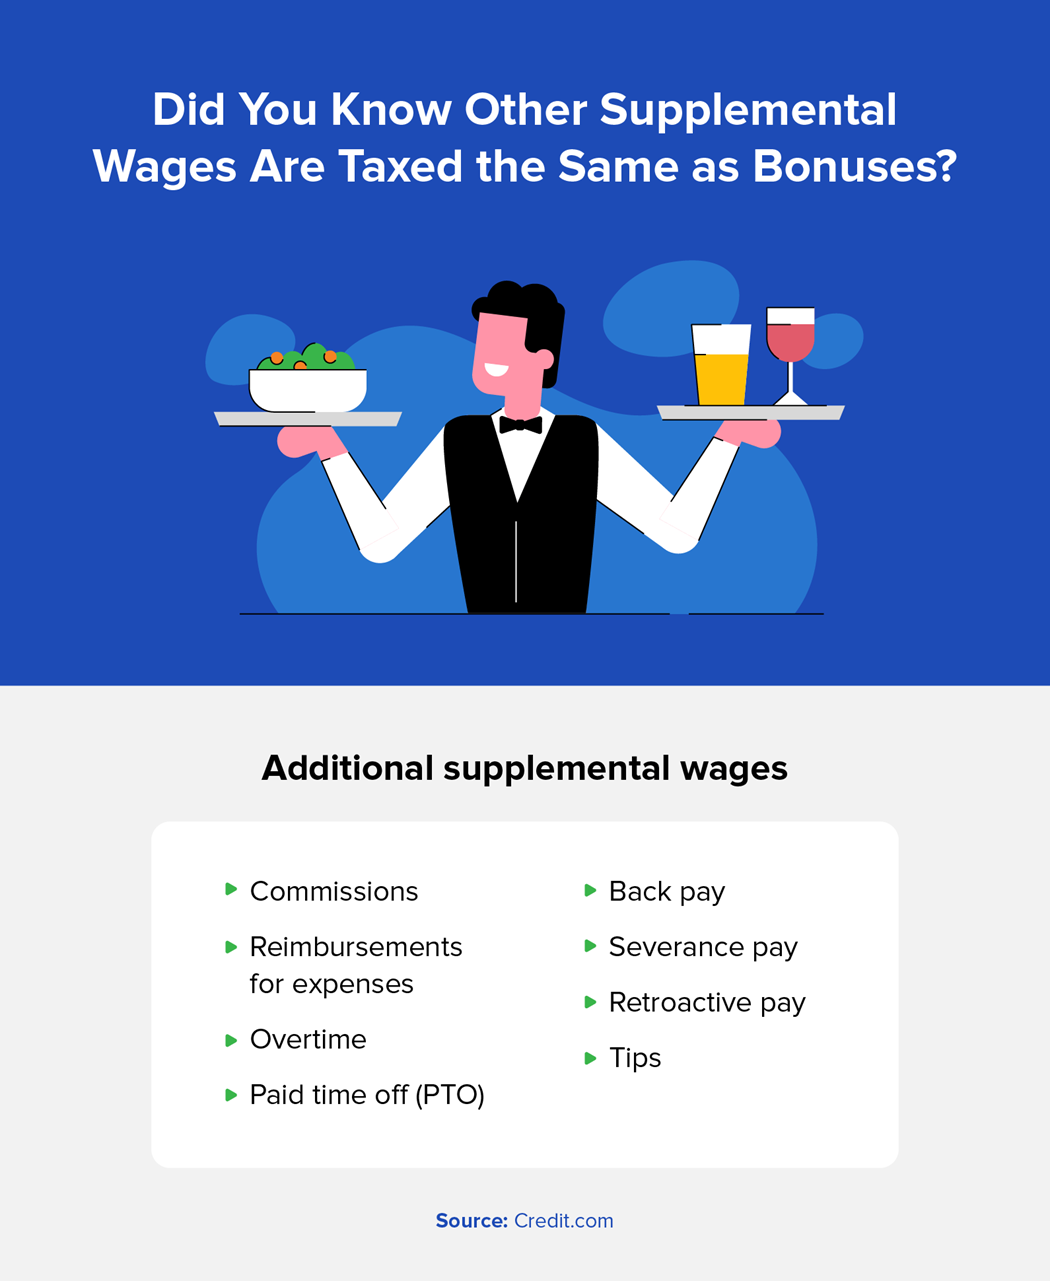 Did you know other supplemental wages are taxed the same as bonuses?